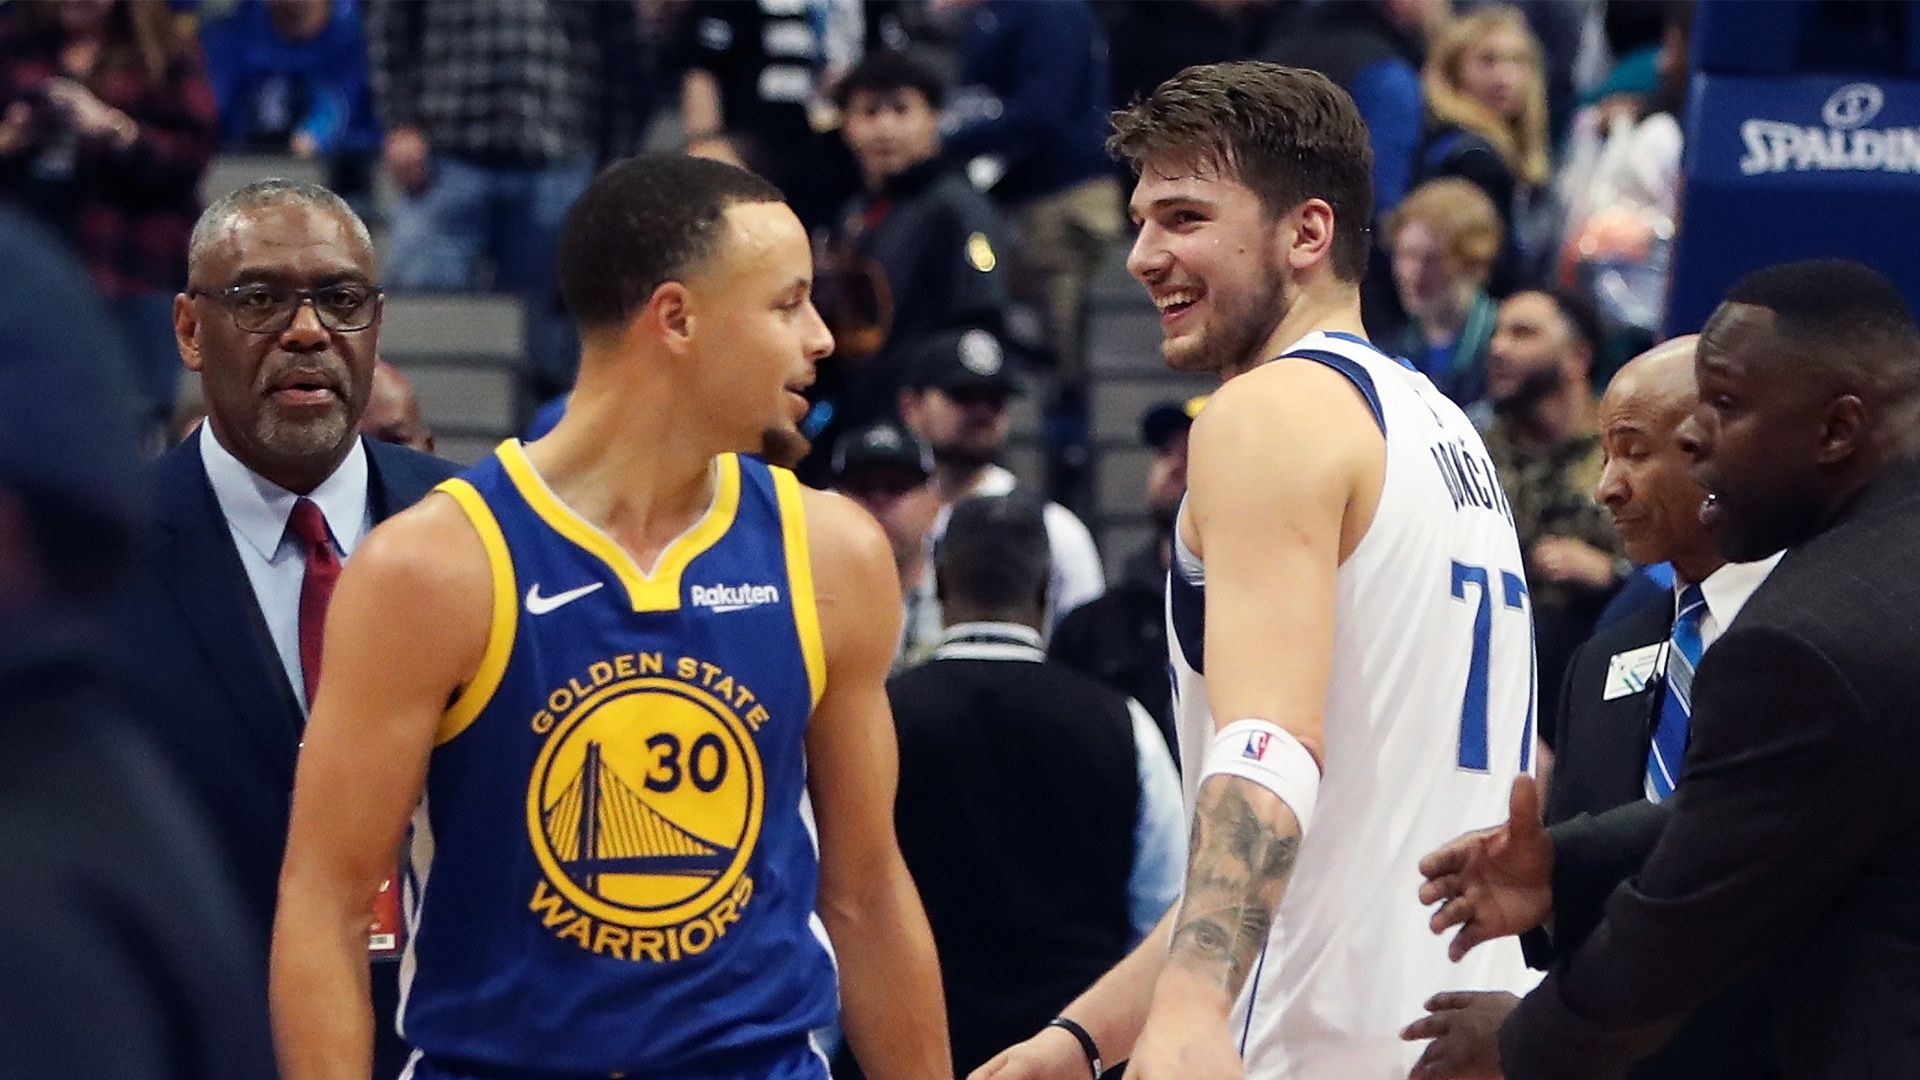 Luka Doncic developing into NBA superstar as clash with Warriors